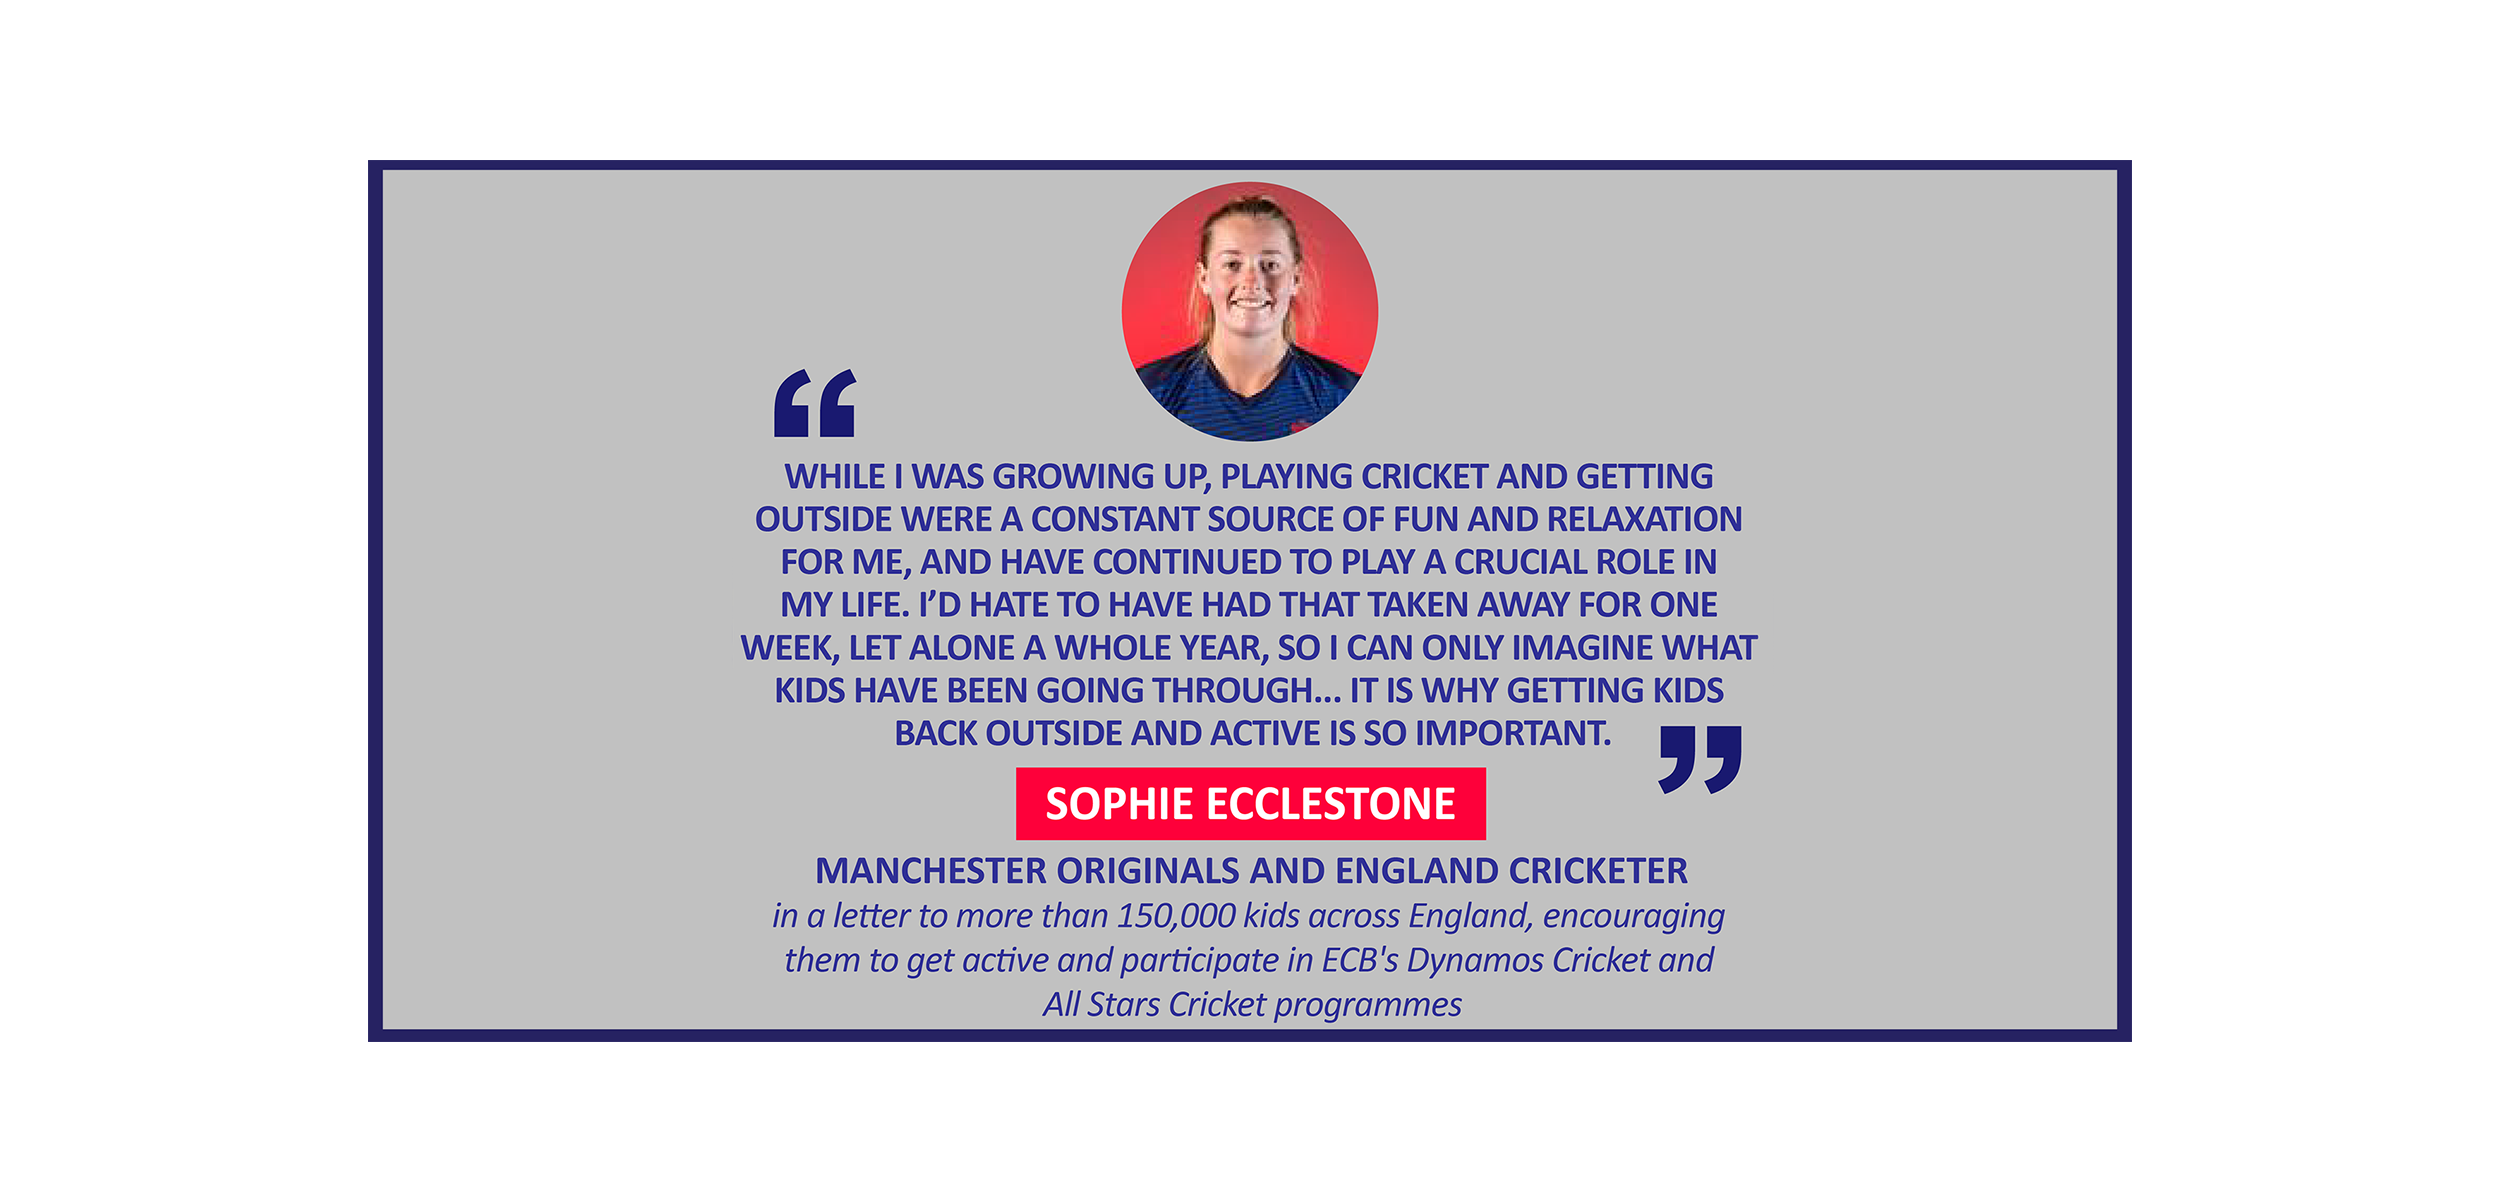 Sophie Ecclestone, Manchester Originals and England Cricketer in a letter to more than 150,000 kids across England, encouraging them to get active and participate in ECB's Dynamos Cricket and All Stars Cricket programmes